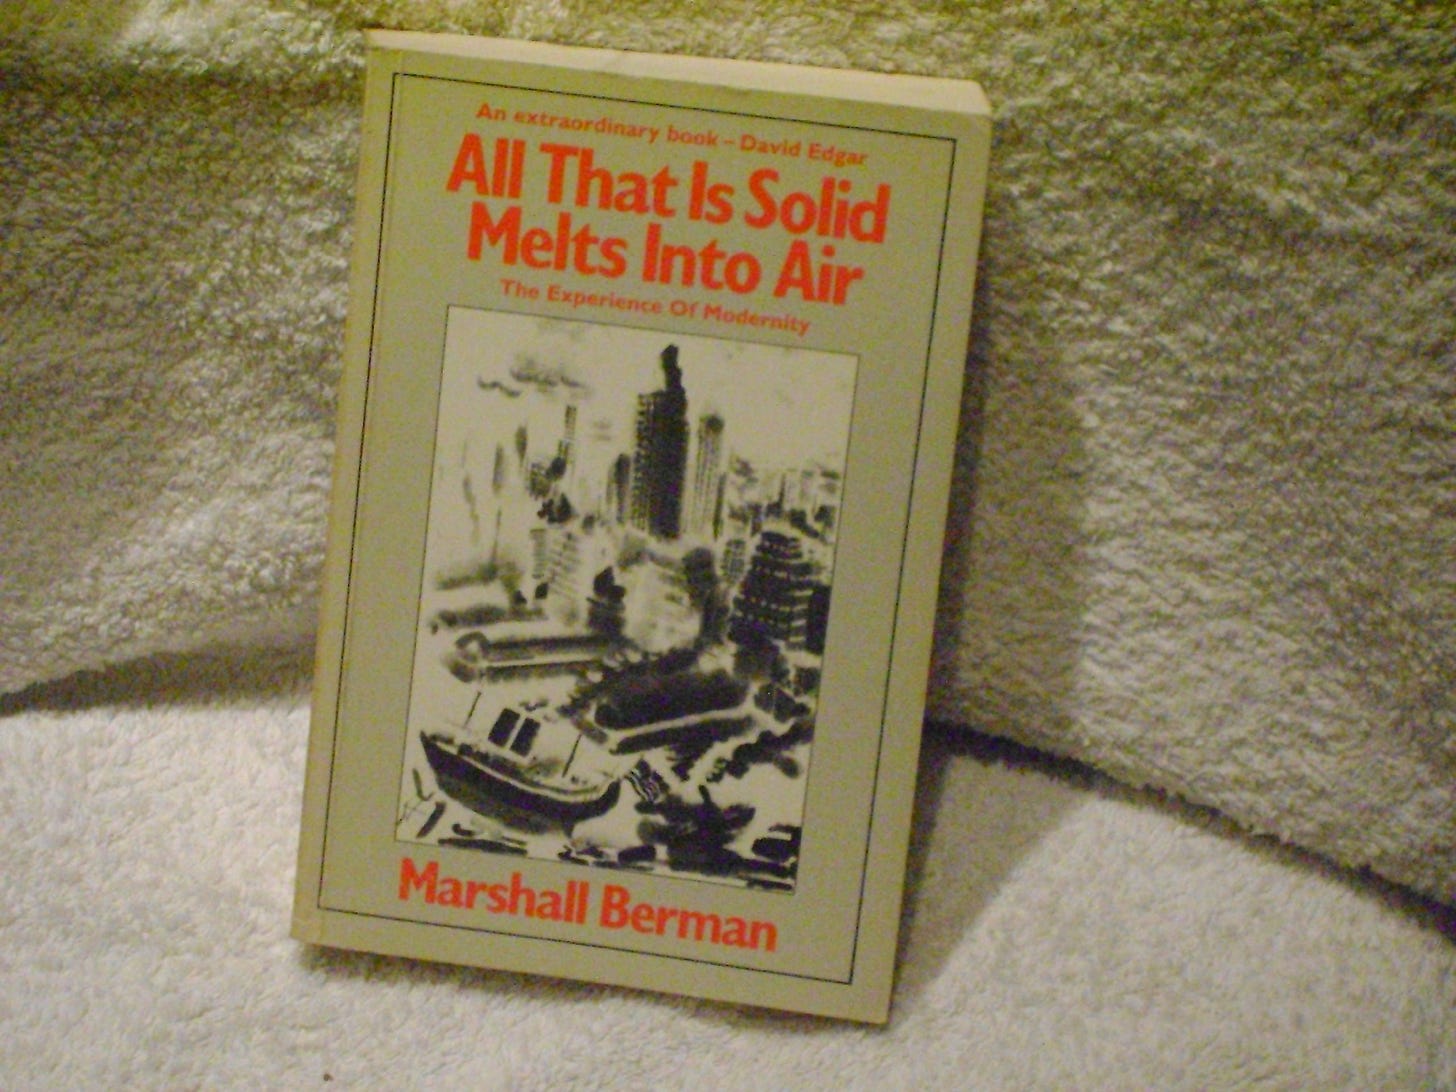 All That Is Solid Melts into Air: Marshall Berman: 9780671457006:  Amazon.com: Books